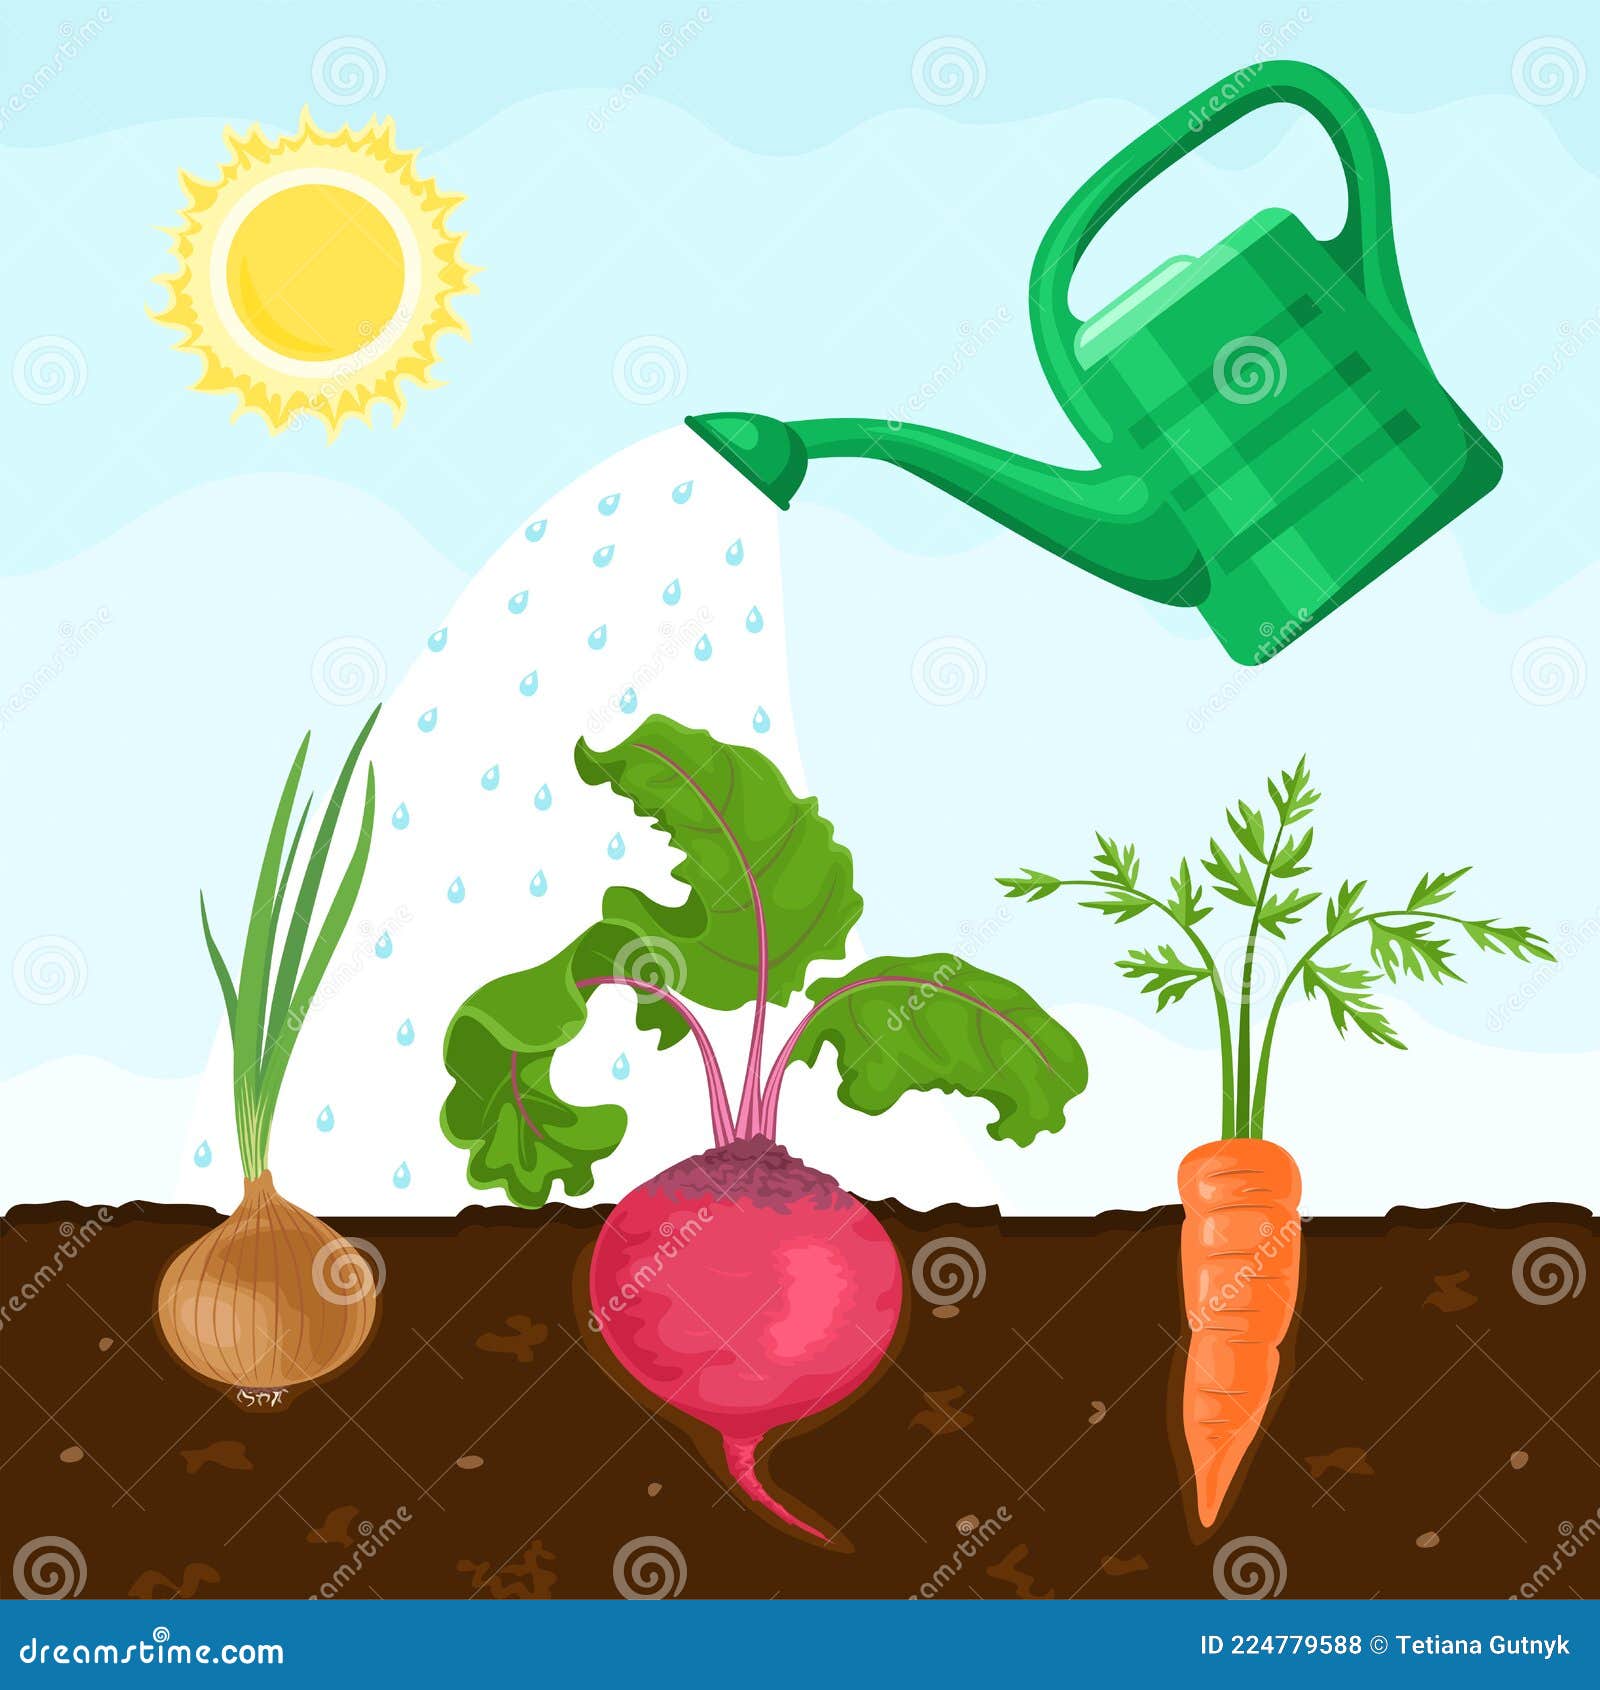 fresh vegetables roots grow in the soil. watering can irrigate the garden.